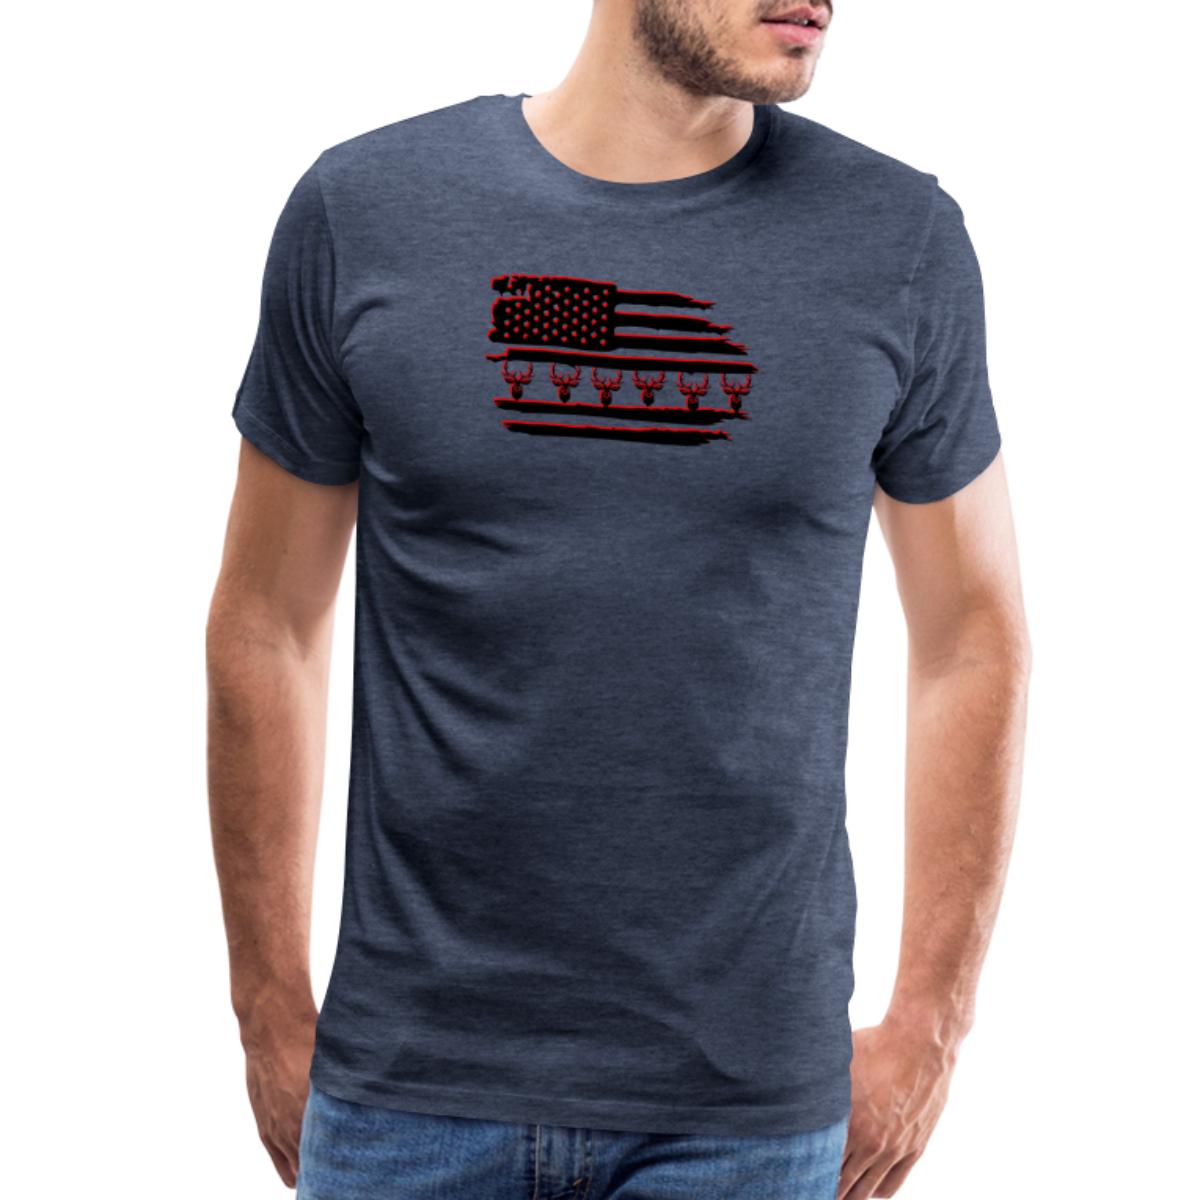 American Flag With One Row Of Deer Heads With Men's Premium T-Shirt ...